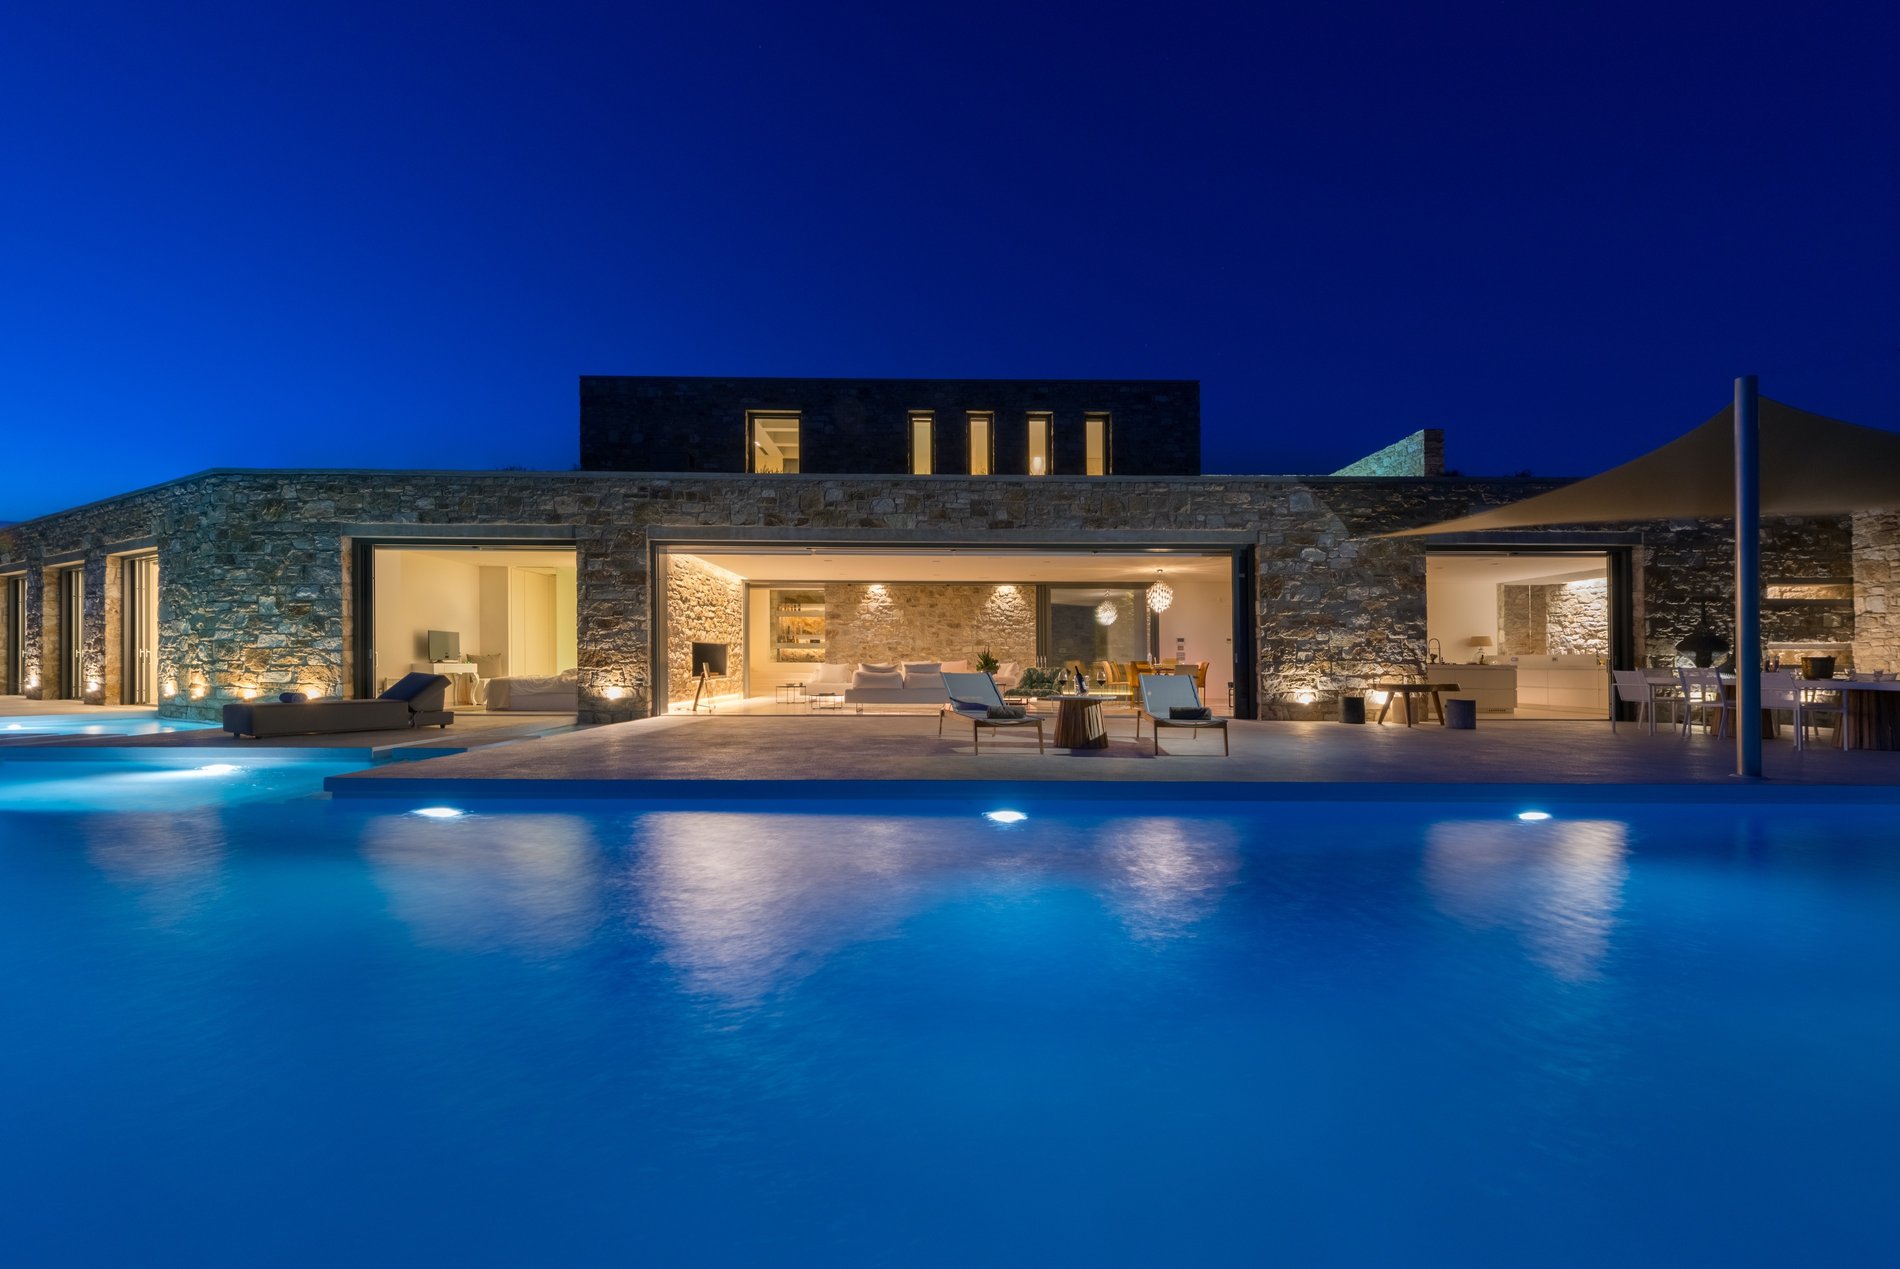 View of this beautiful Modern Home from the infinity pool.